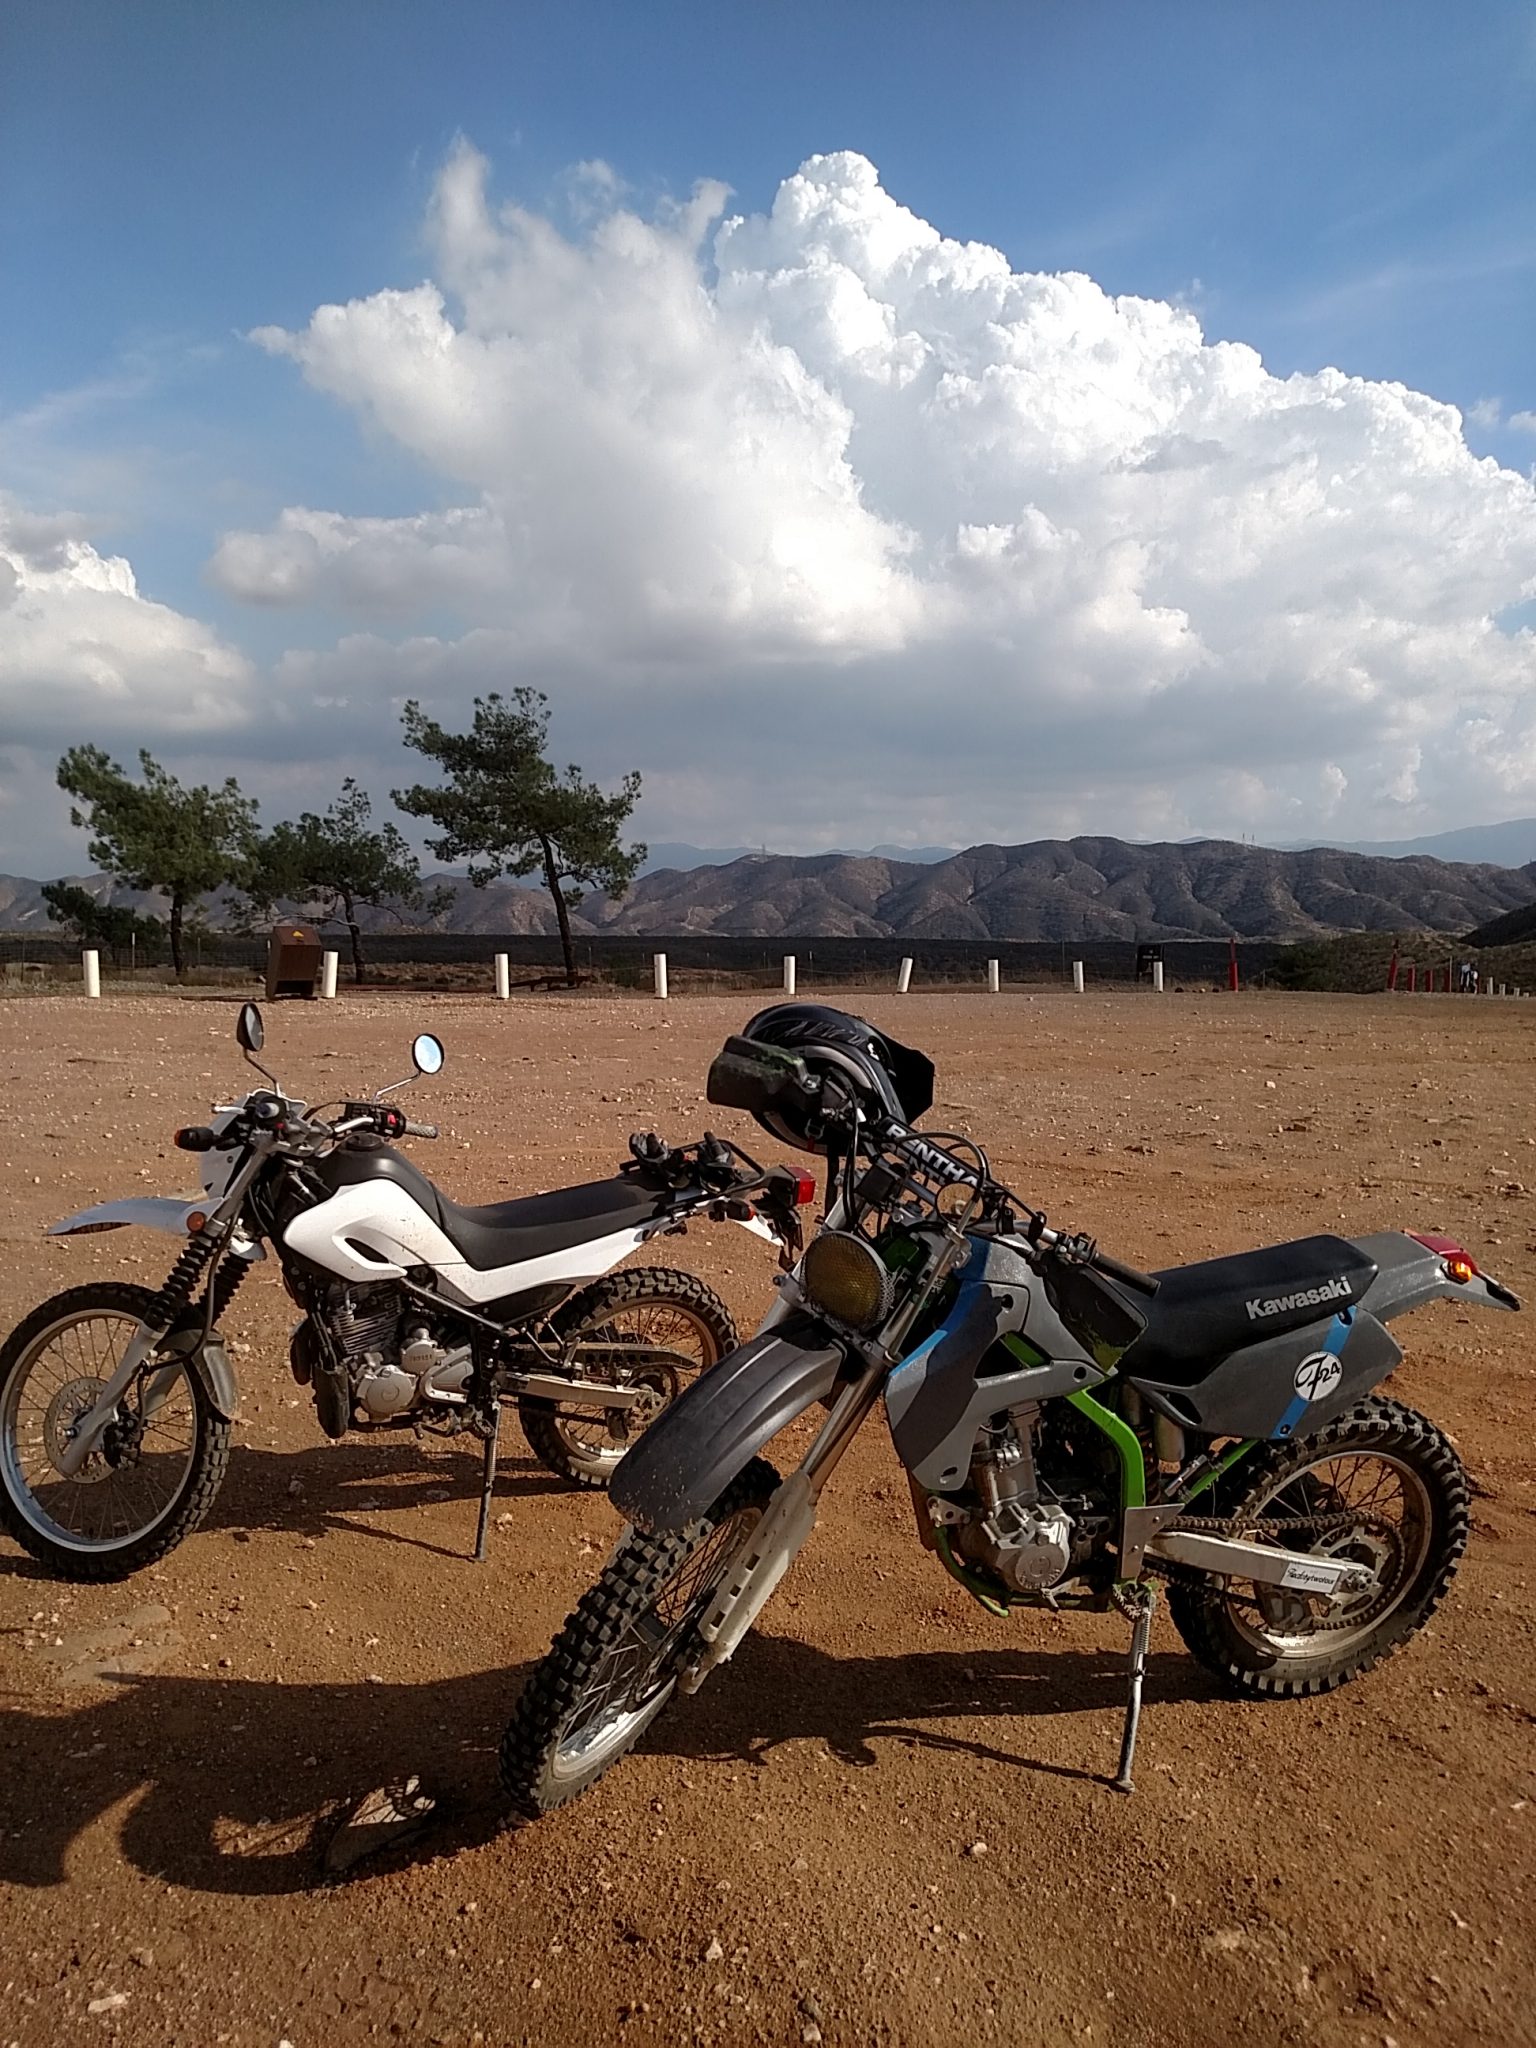 Overland Motorcycling